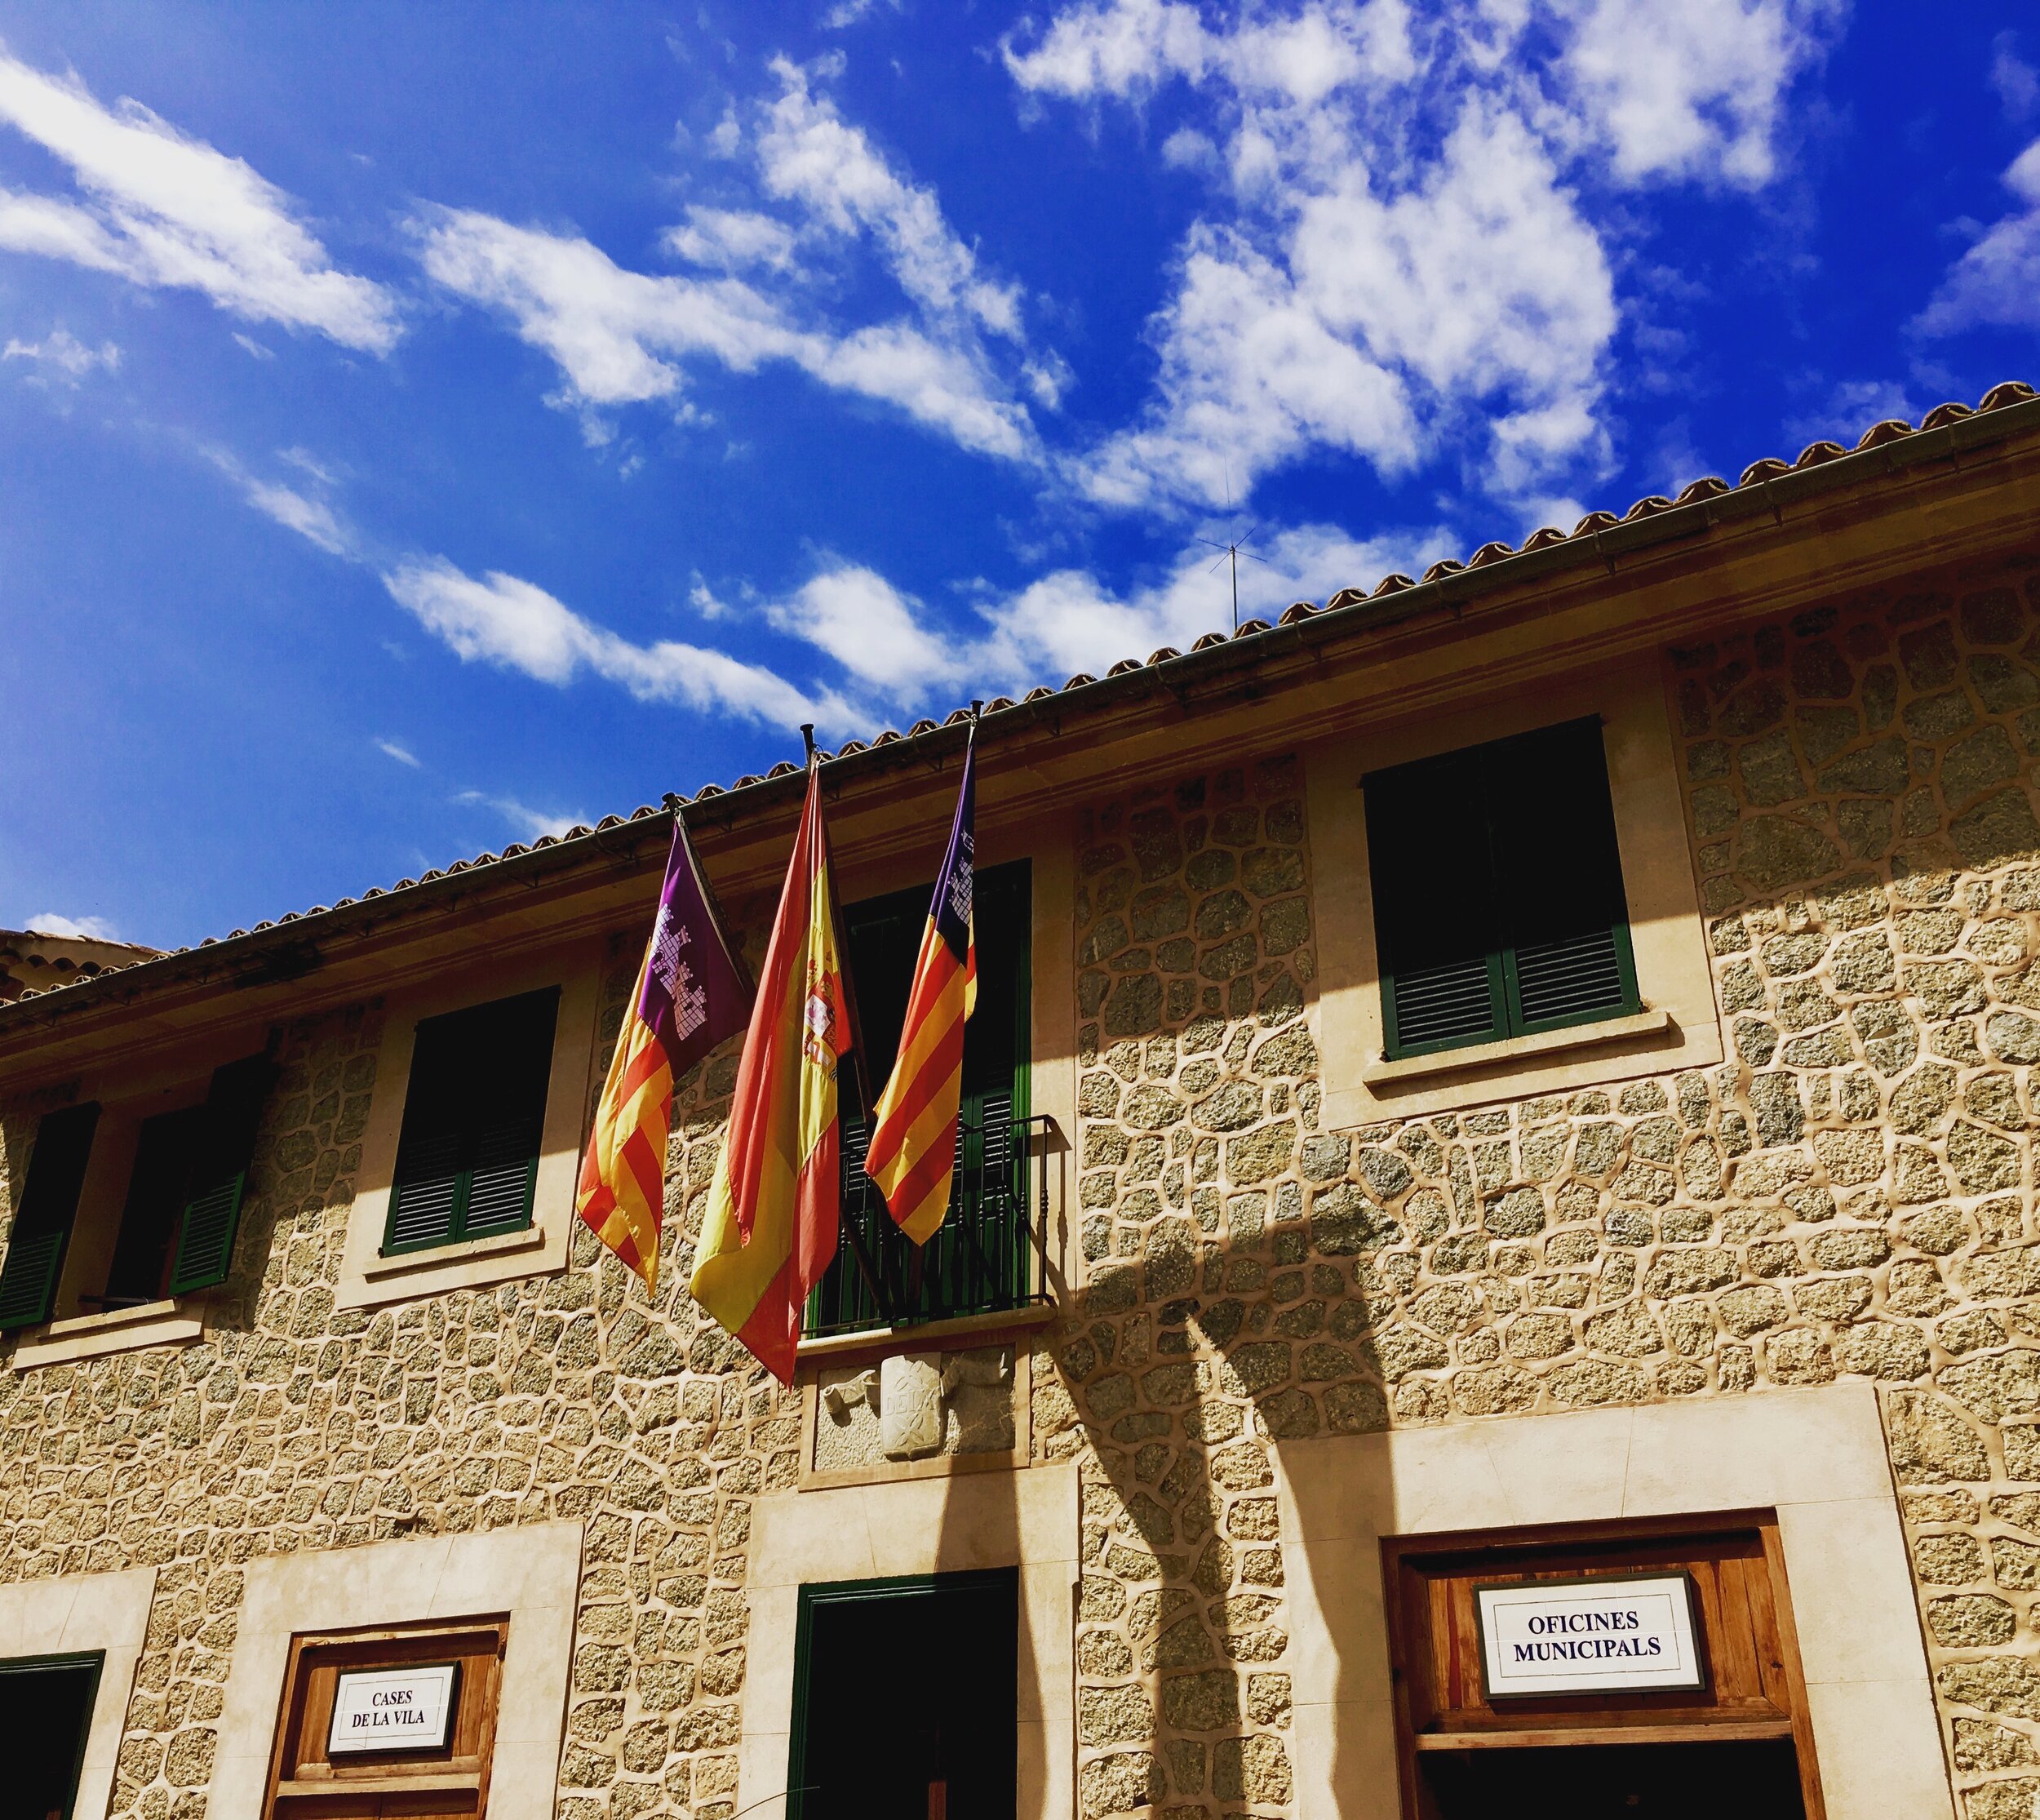 The flags shown on a building in Mallorca, where you will find a dialect of Catalan.